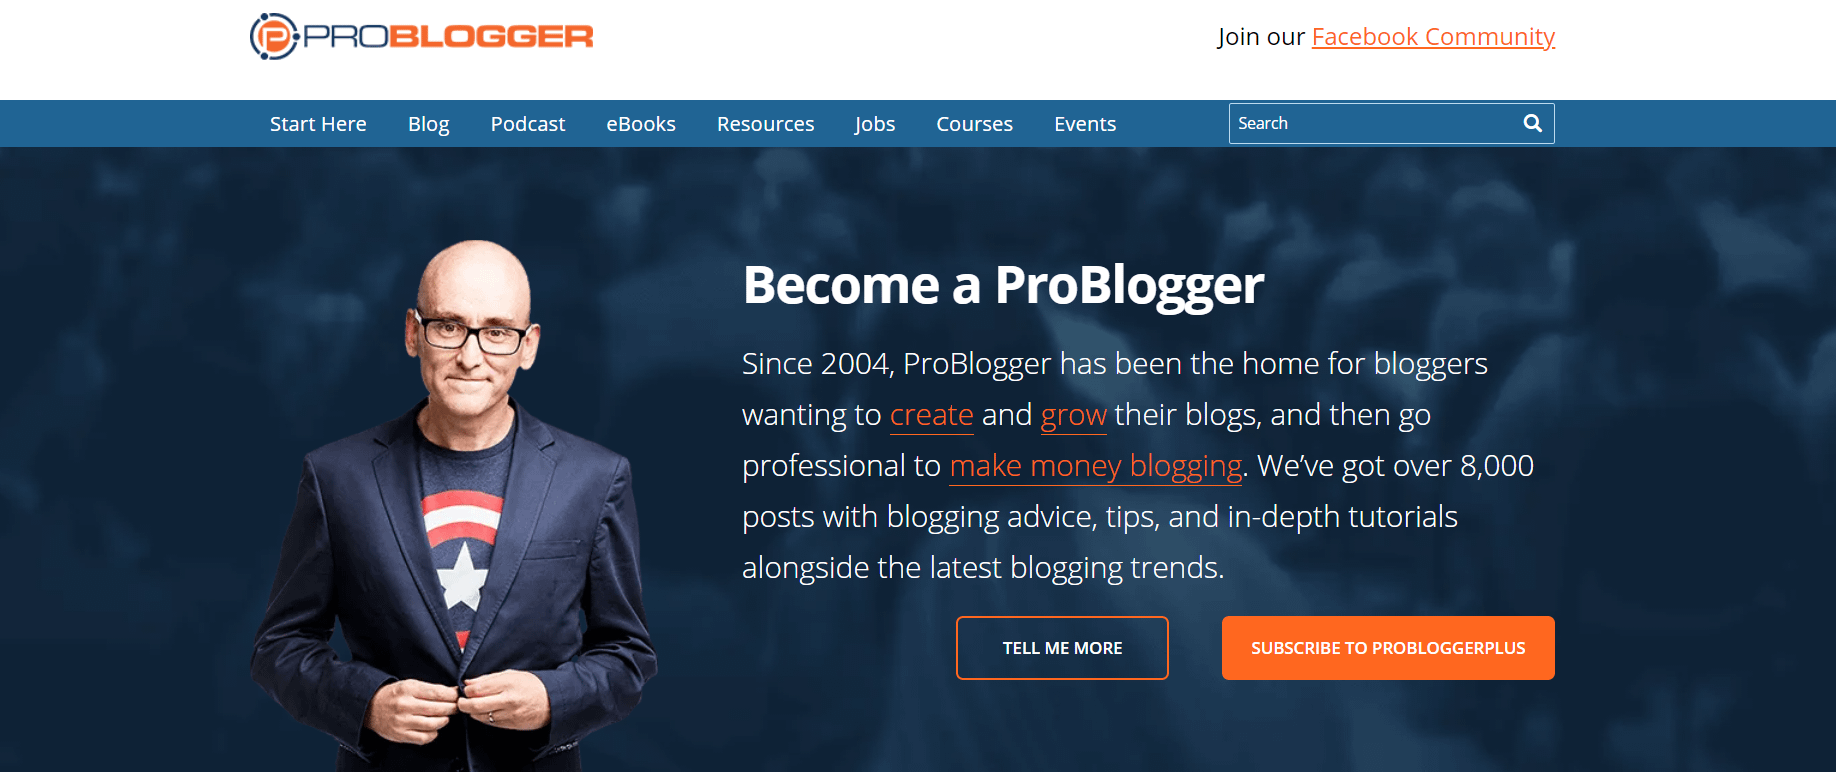 The ProBlogger home page.